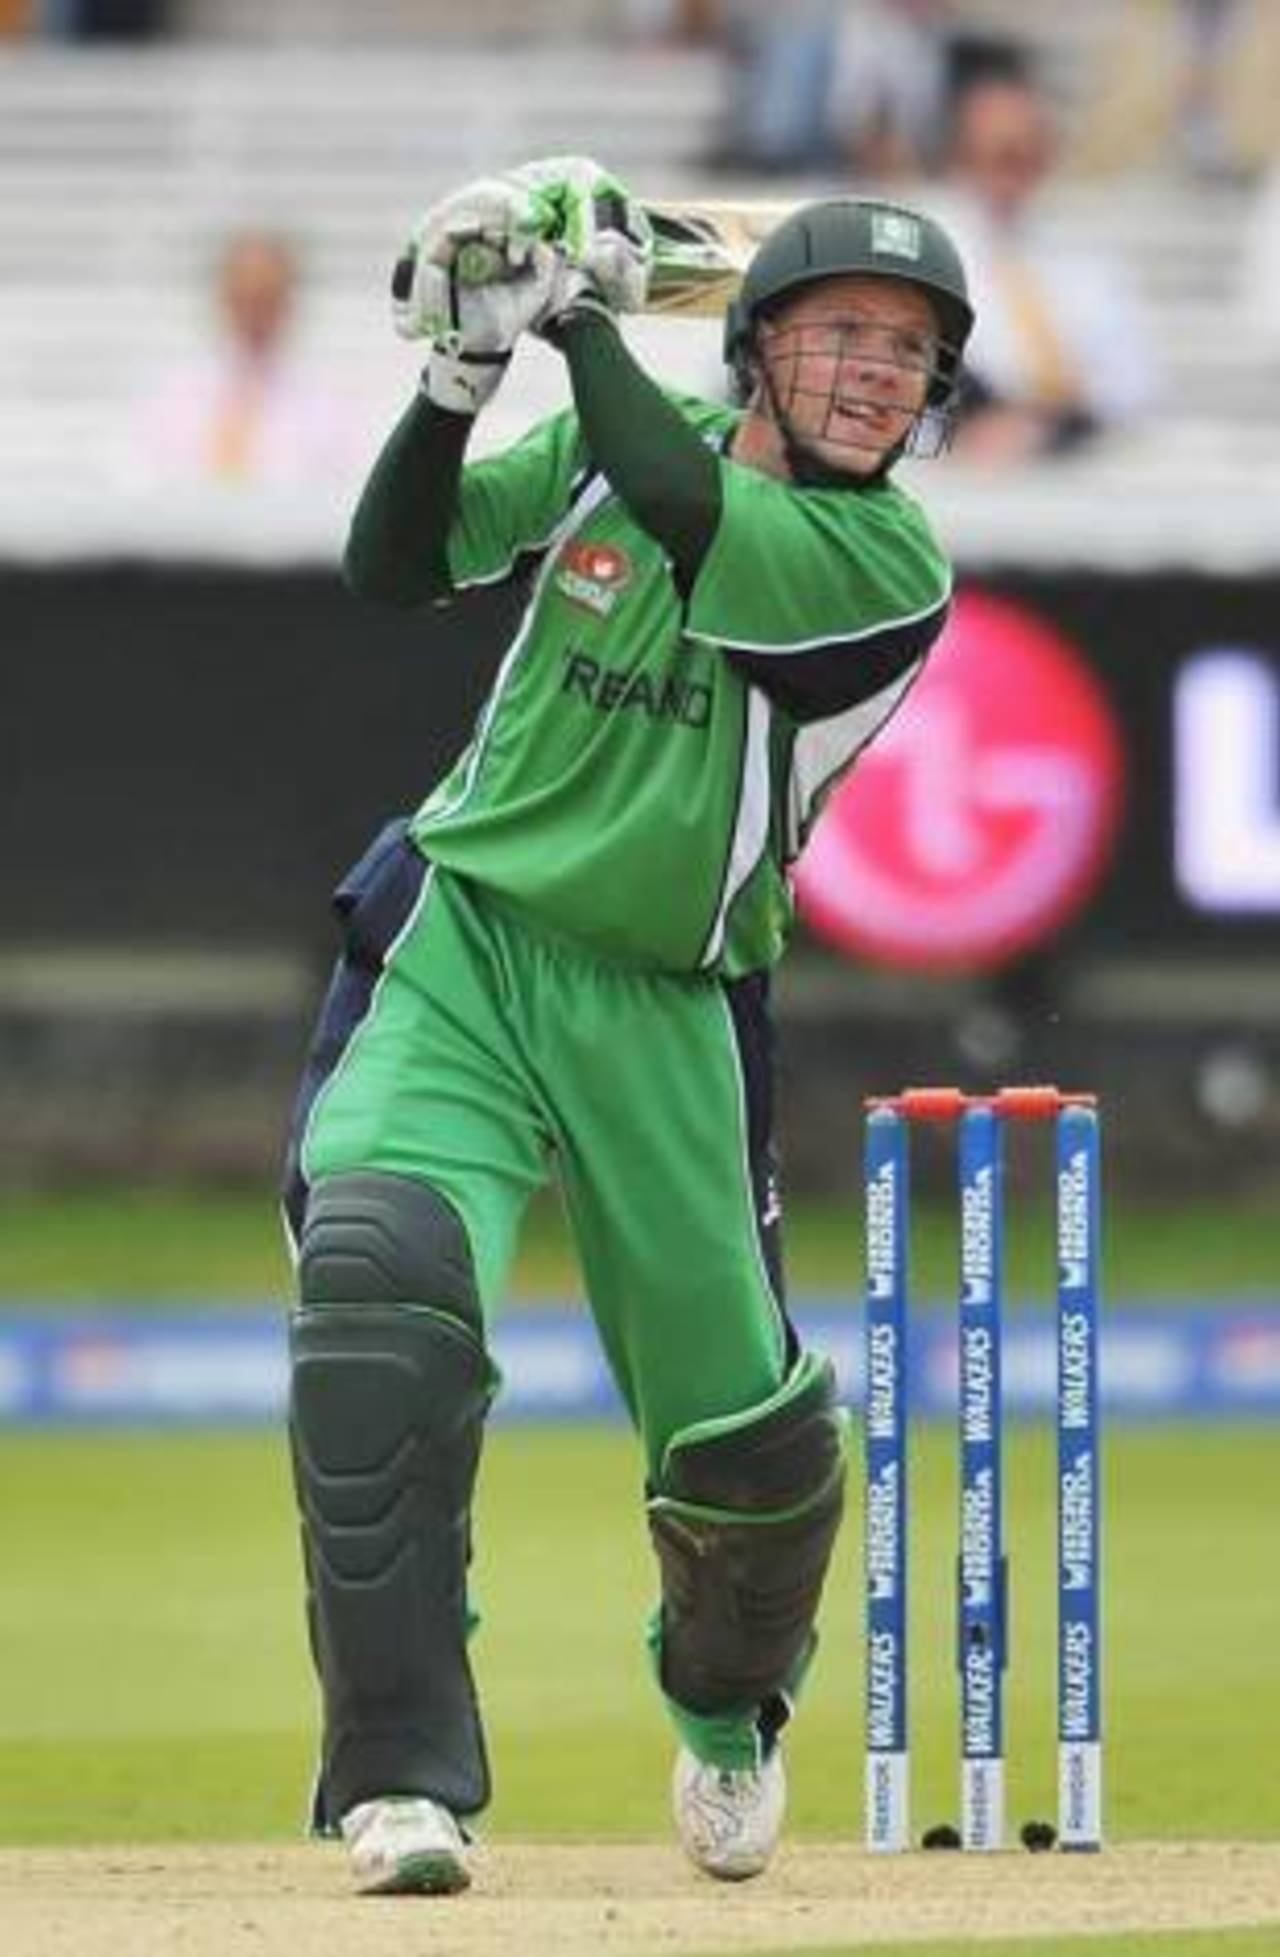 Ireland were within reach of their target as long as an injured Niall O'Brien remained at the crease&nbsp;&nbsp;&bull;&nbsp;&nbsp;Getty Images